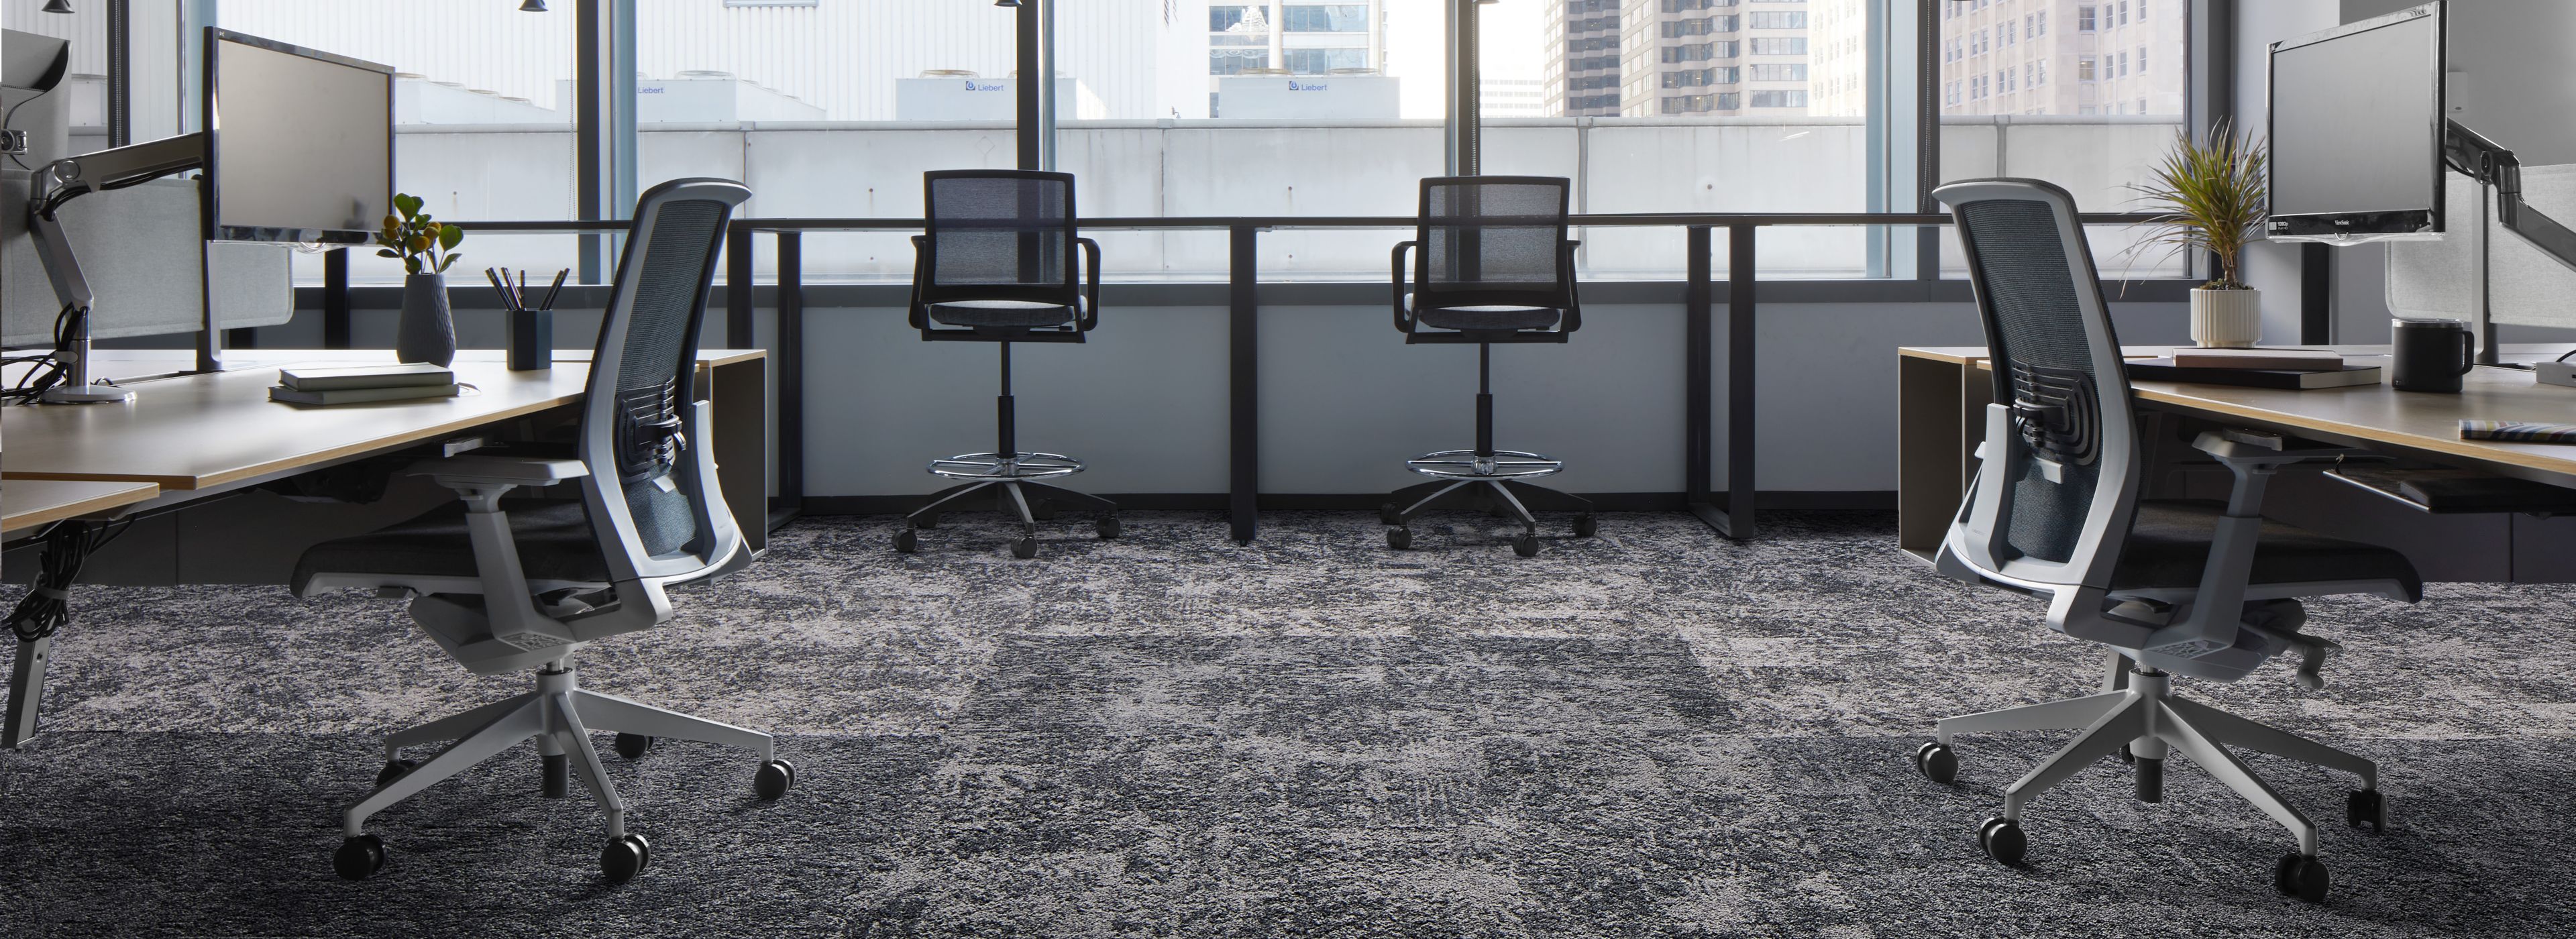 Interface Two To Tango carpet tile in office space imagen número 1